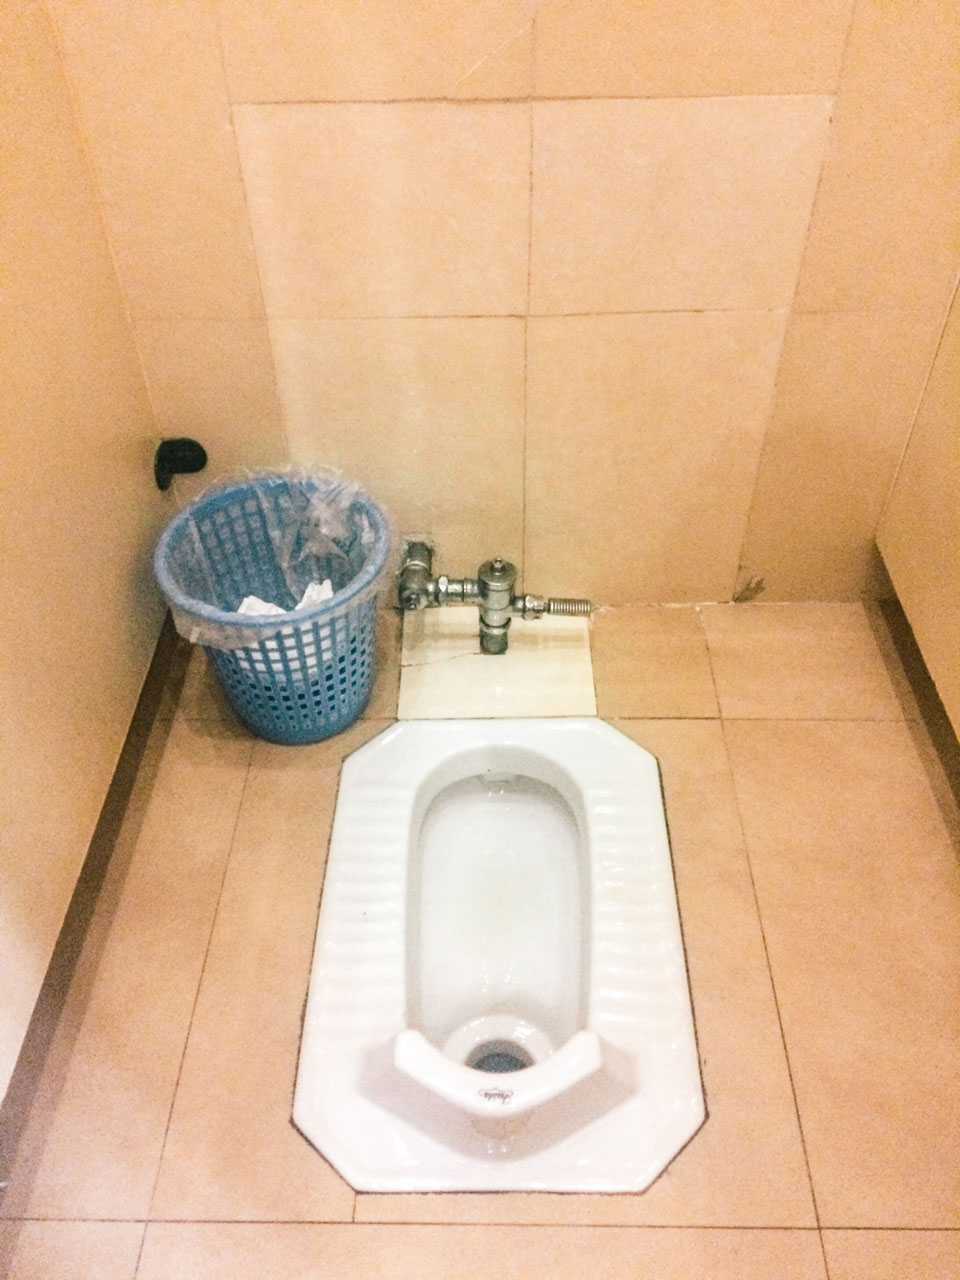 A traditional Asian squat toilet in Beijing, China